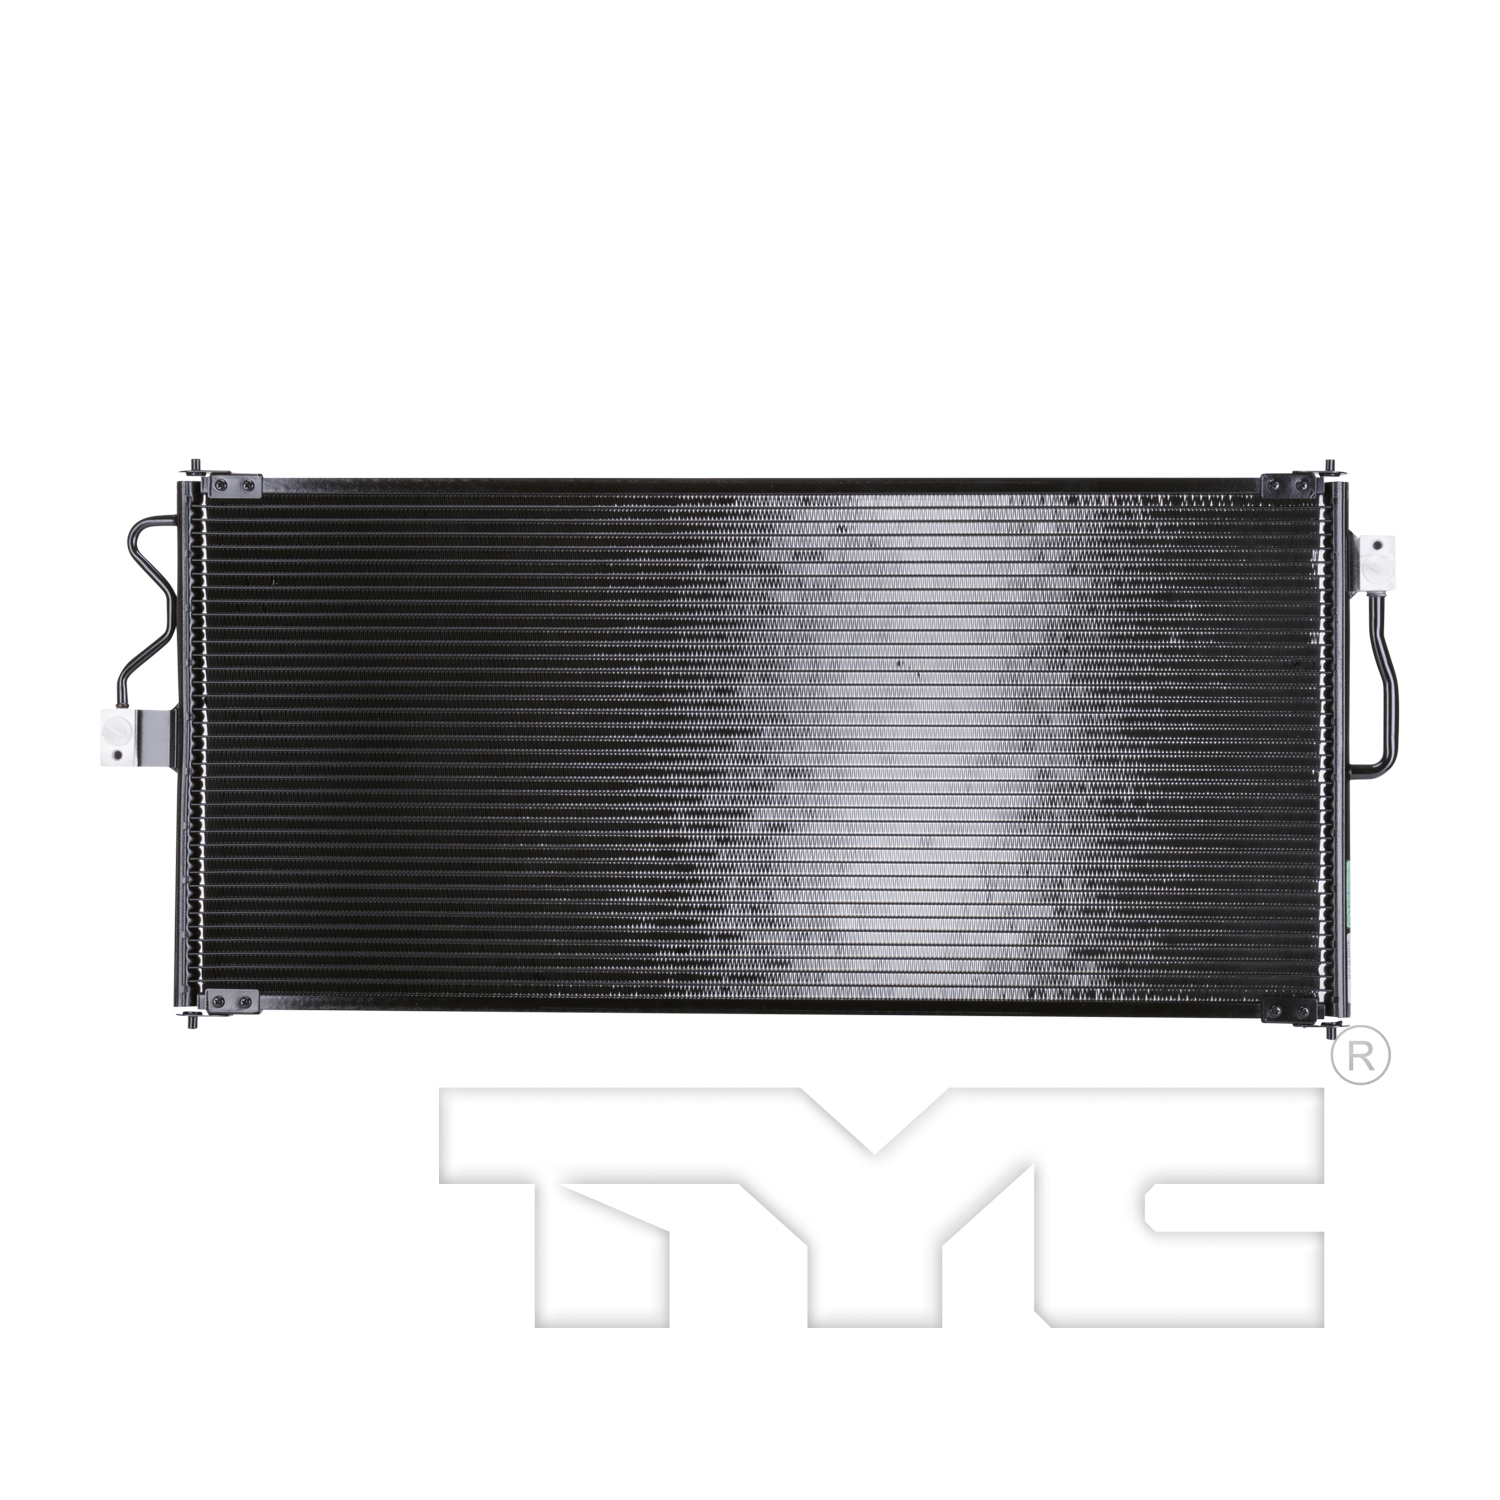 Aftermarket AC CONDENSERS for FORD - FREESTAR, FREESTAR,04-07,Air conditioning condenser